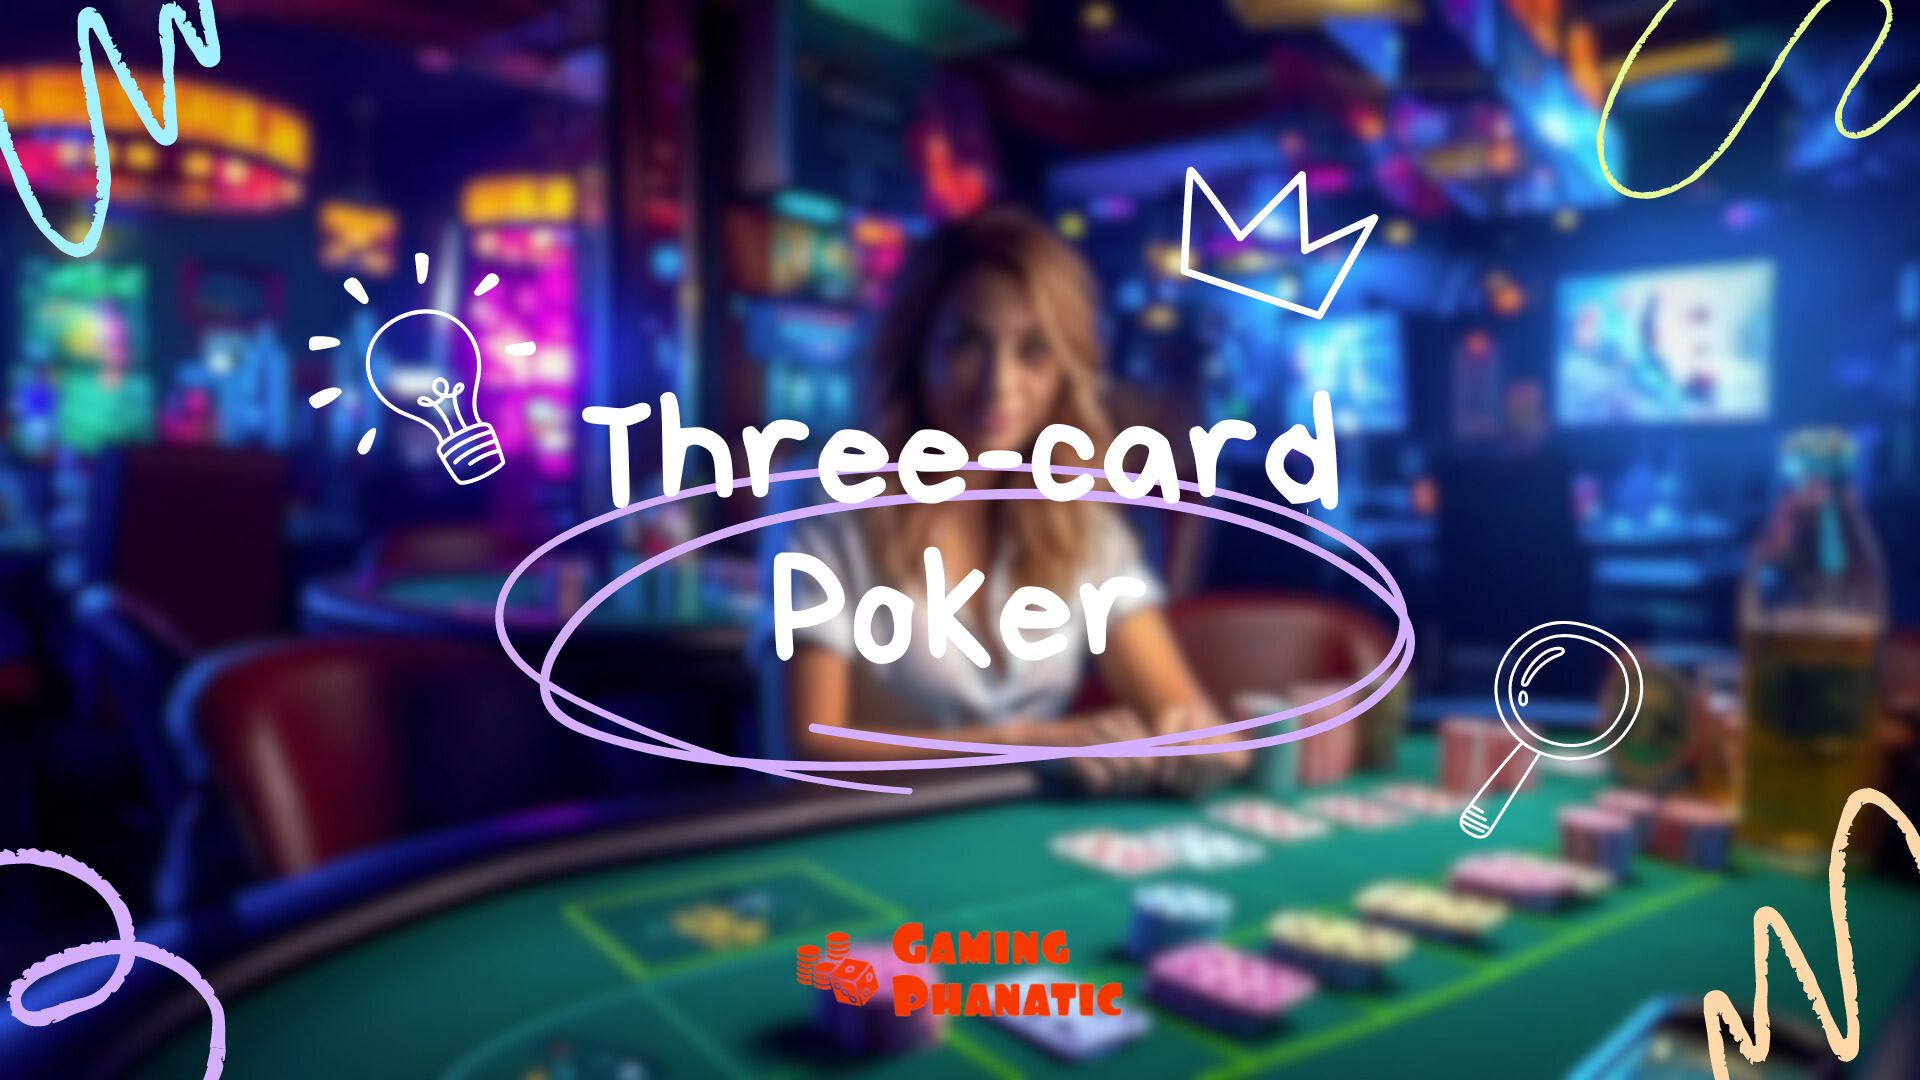 What is three-card poker?